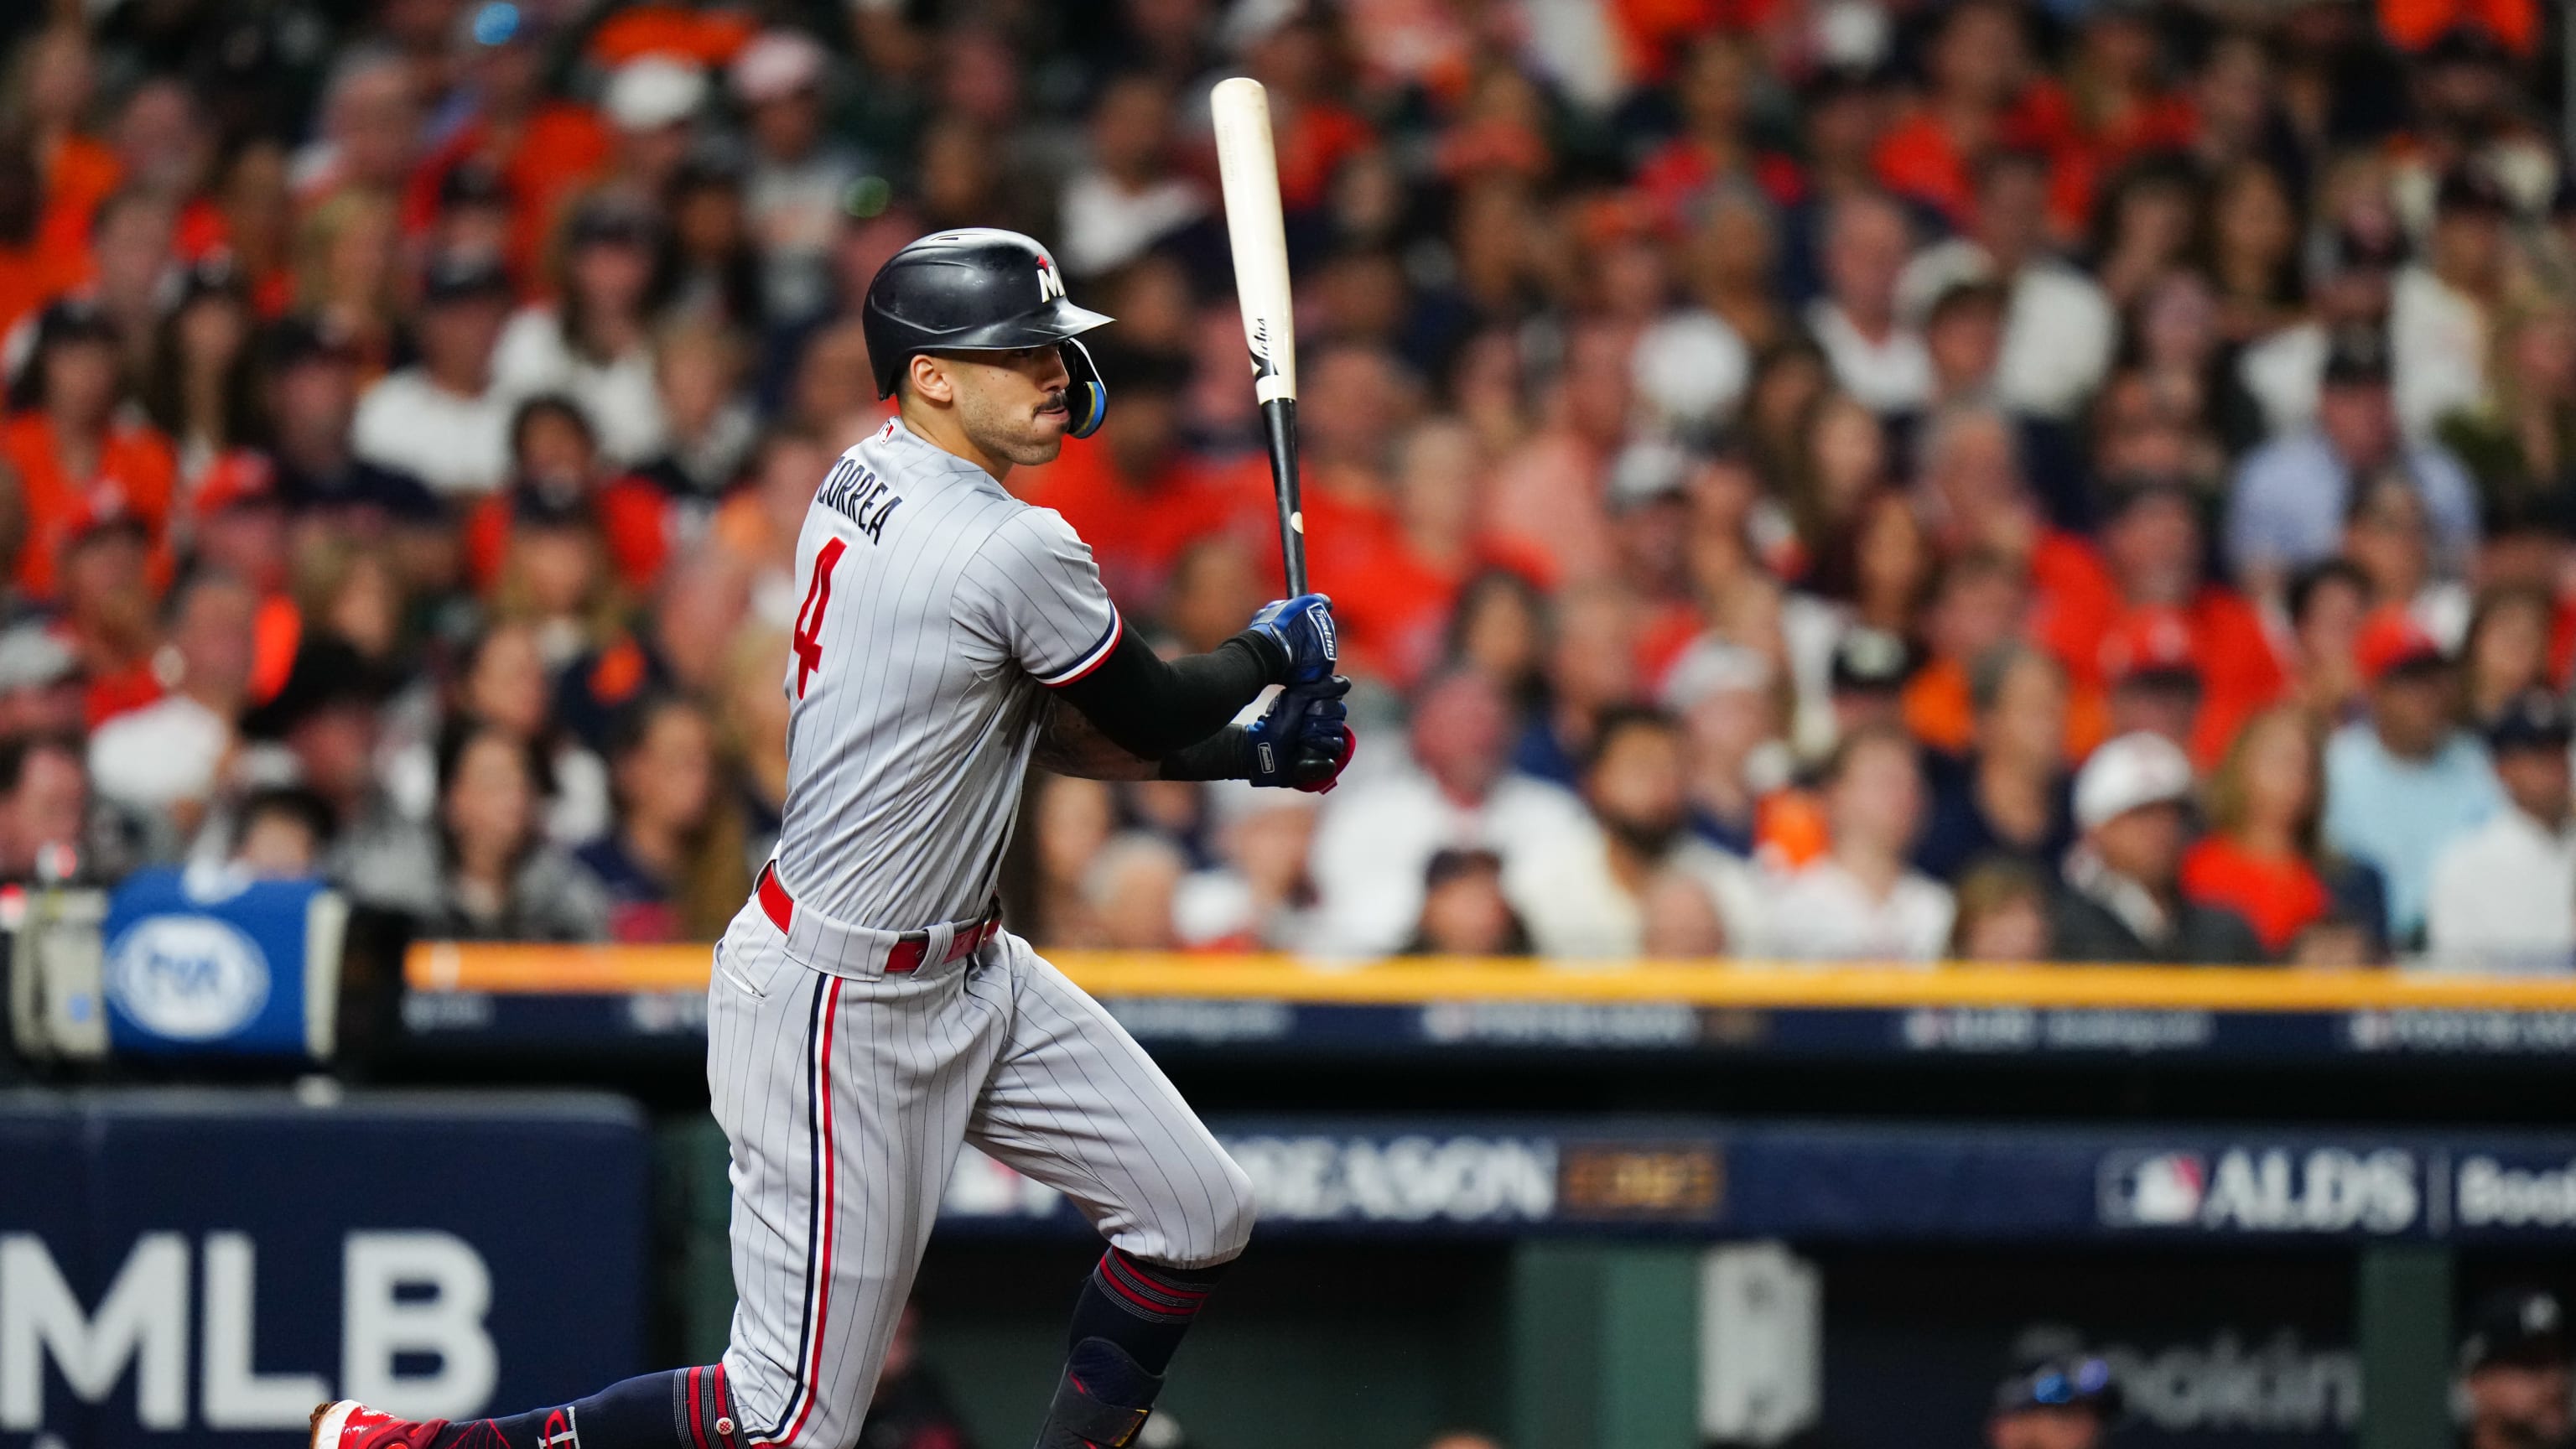 Lackluster Performance Puts Carlos Correa in Running for the AL's